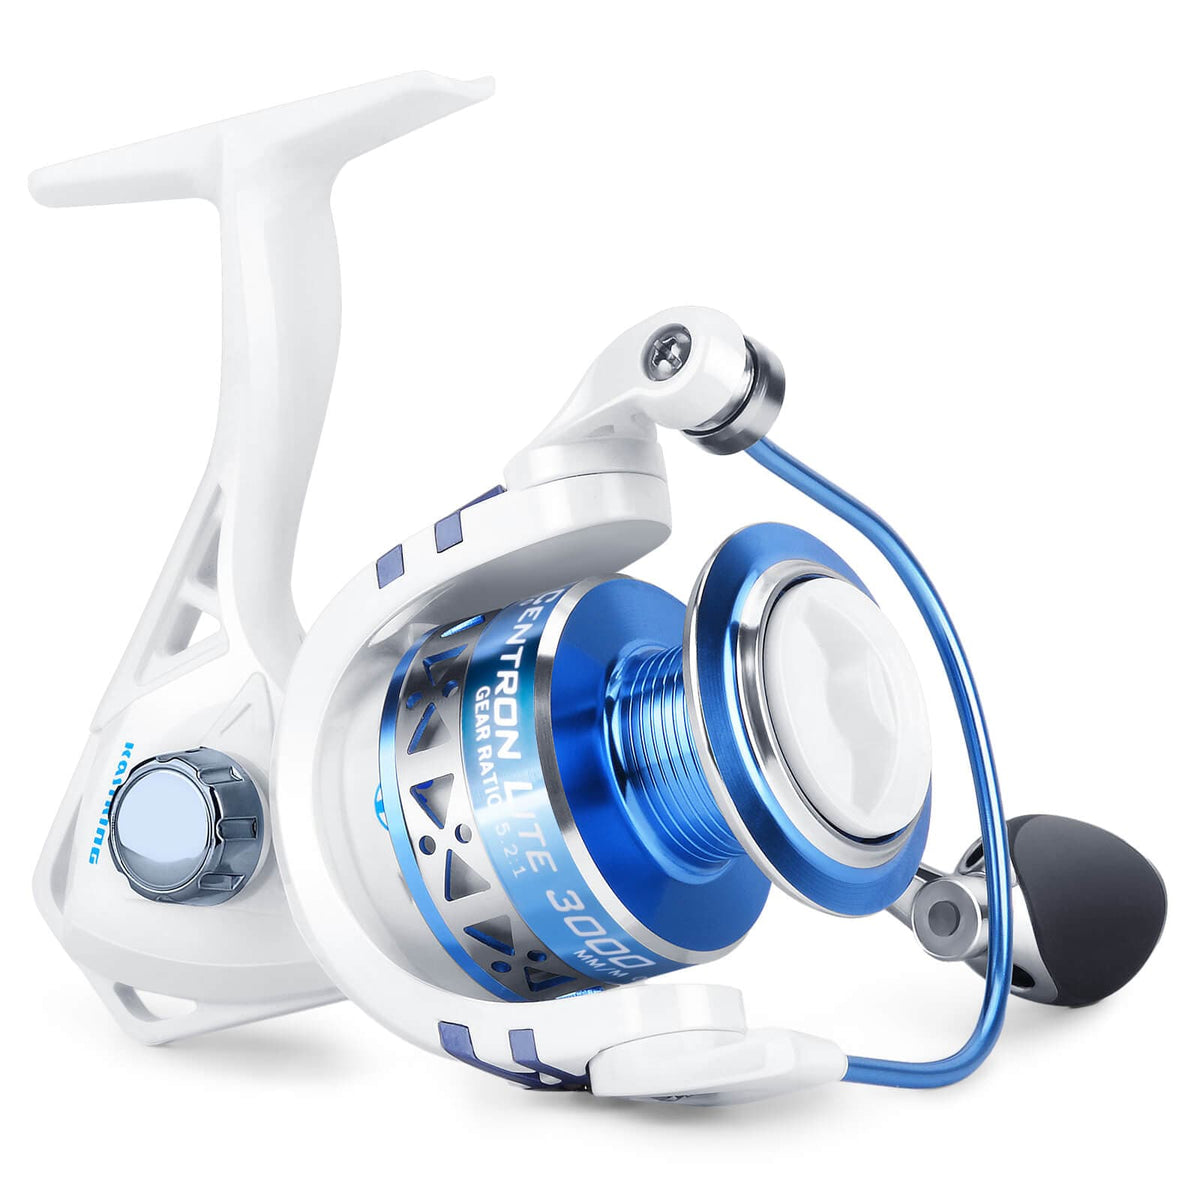  Zephyr Spinning Reel,Size 500 Ice Fishing Reel, Light Weight  Ultra Smooth Powerful Spinning Fishing Reels